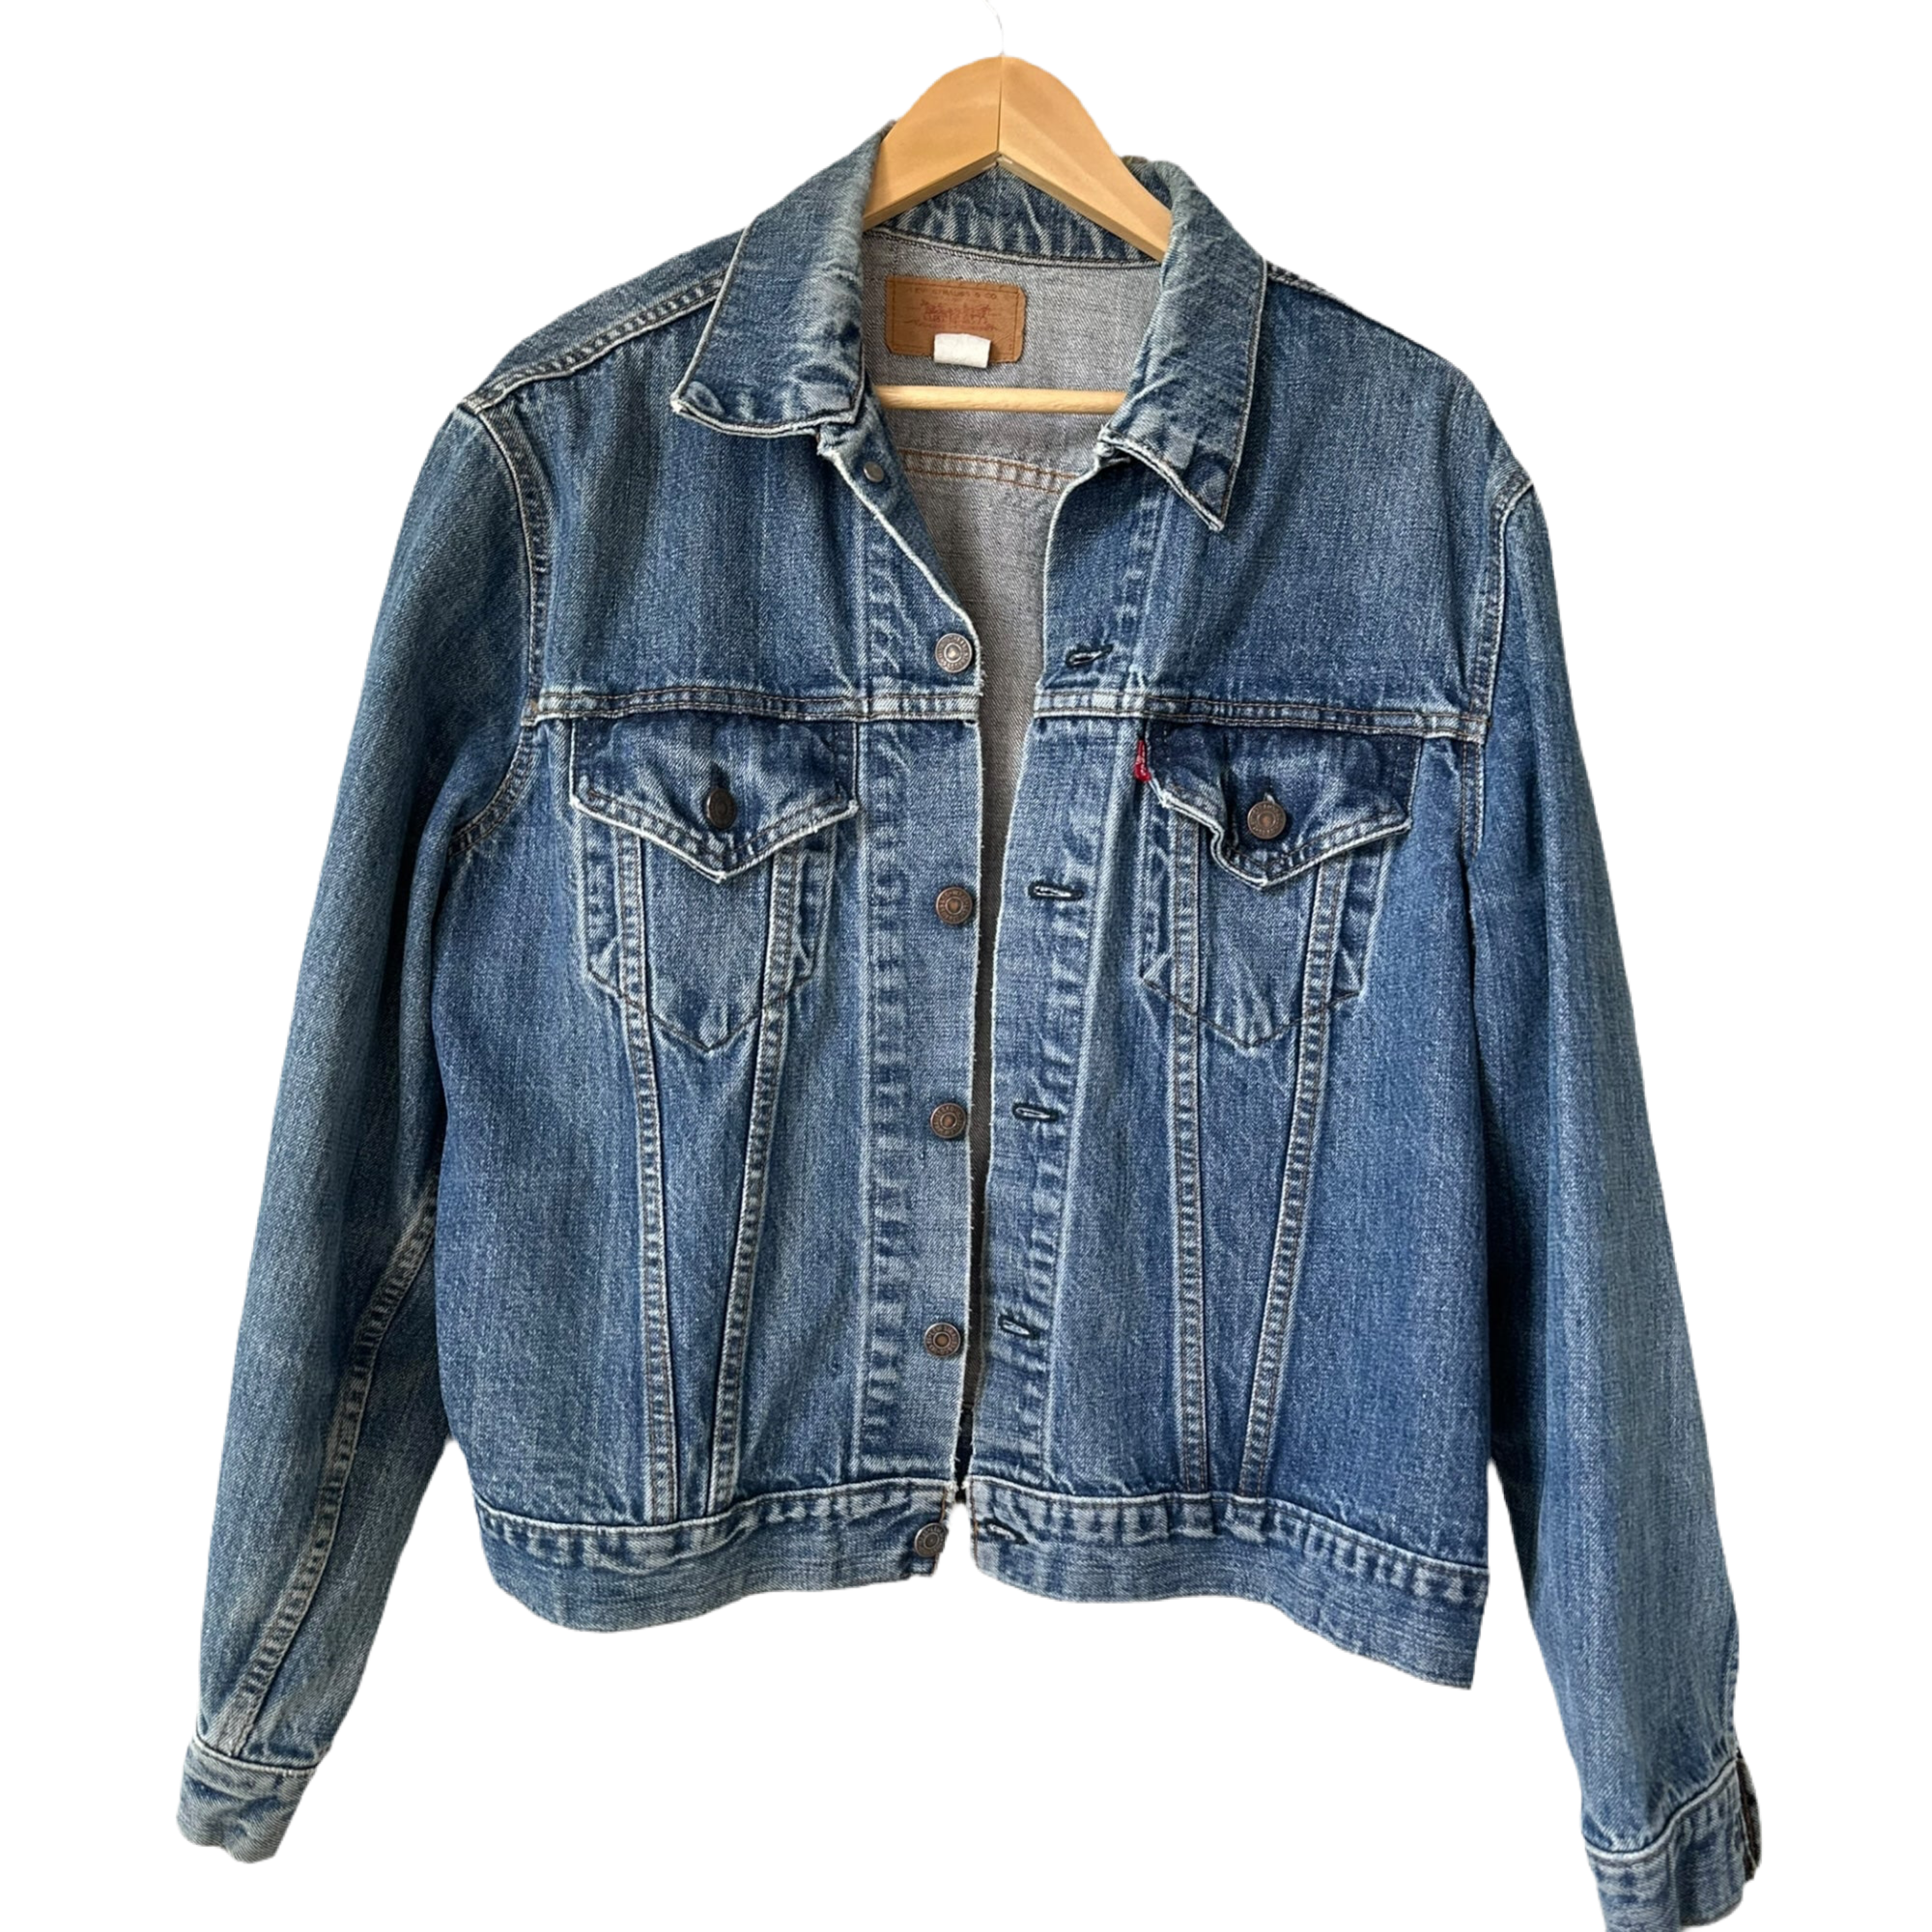 Levi’s Type 3 Trucker Jacket WPL423 Made in the USA (M)